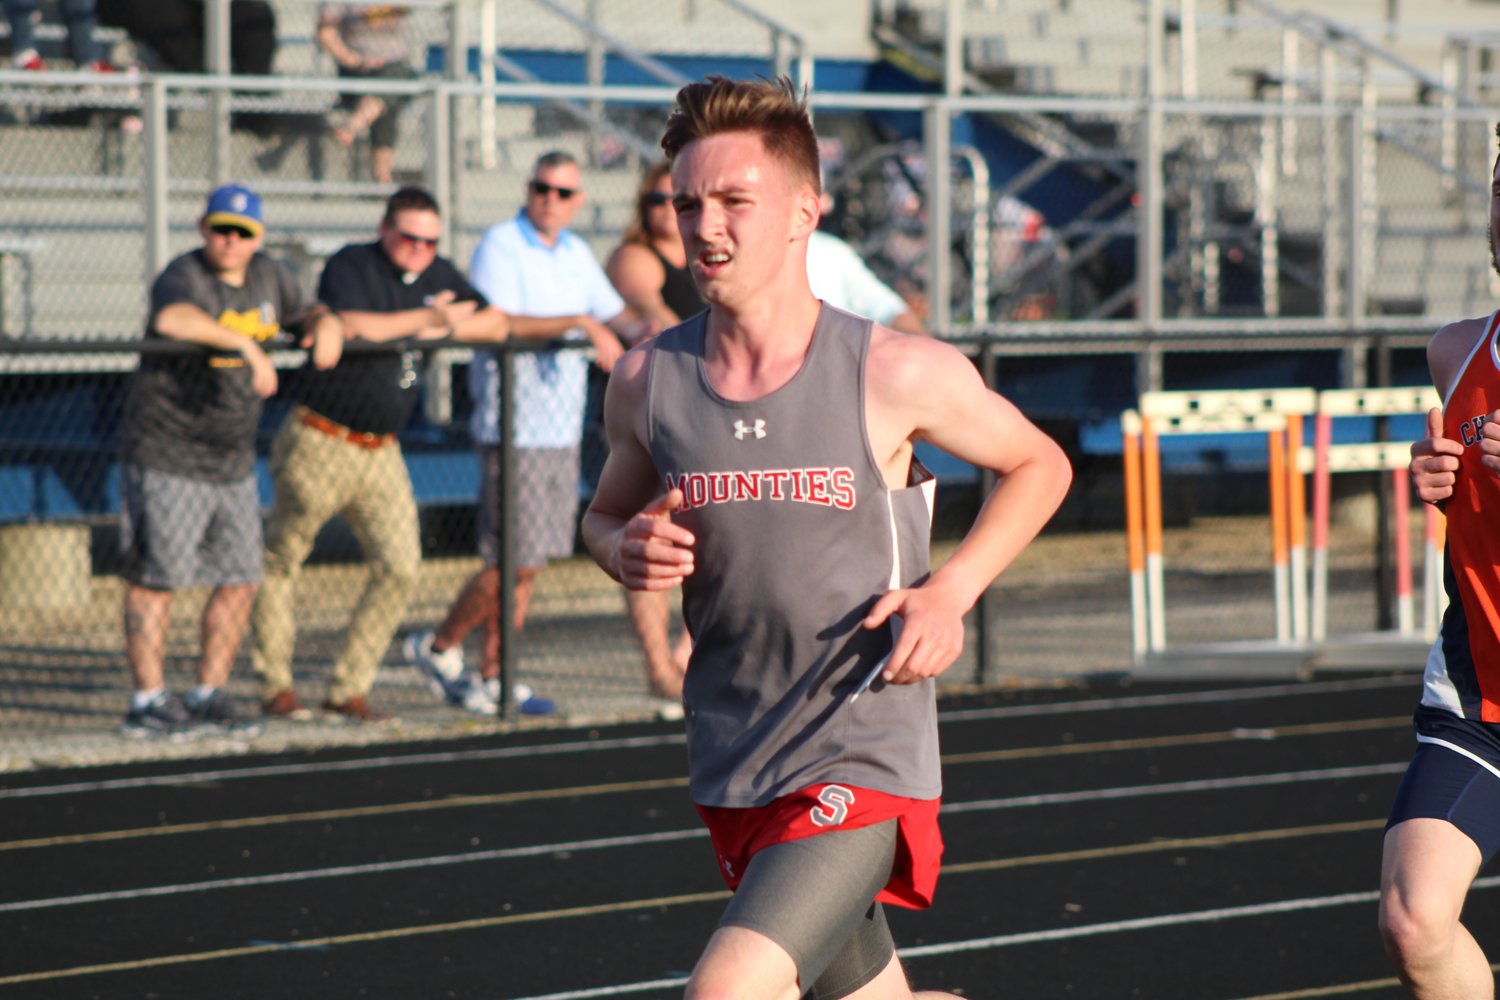 Southmont's Mason Cass would take home the county titles in both the 1600 and 3200 meter runs to help the Mounties capture their first county title since 2013.